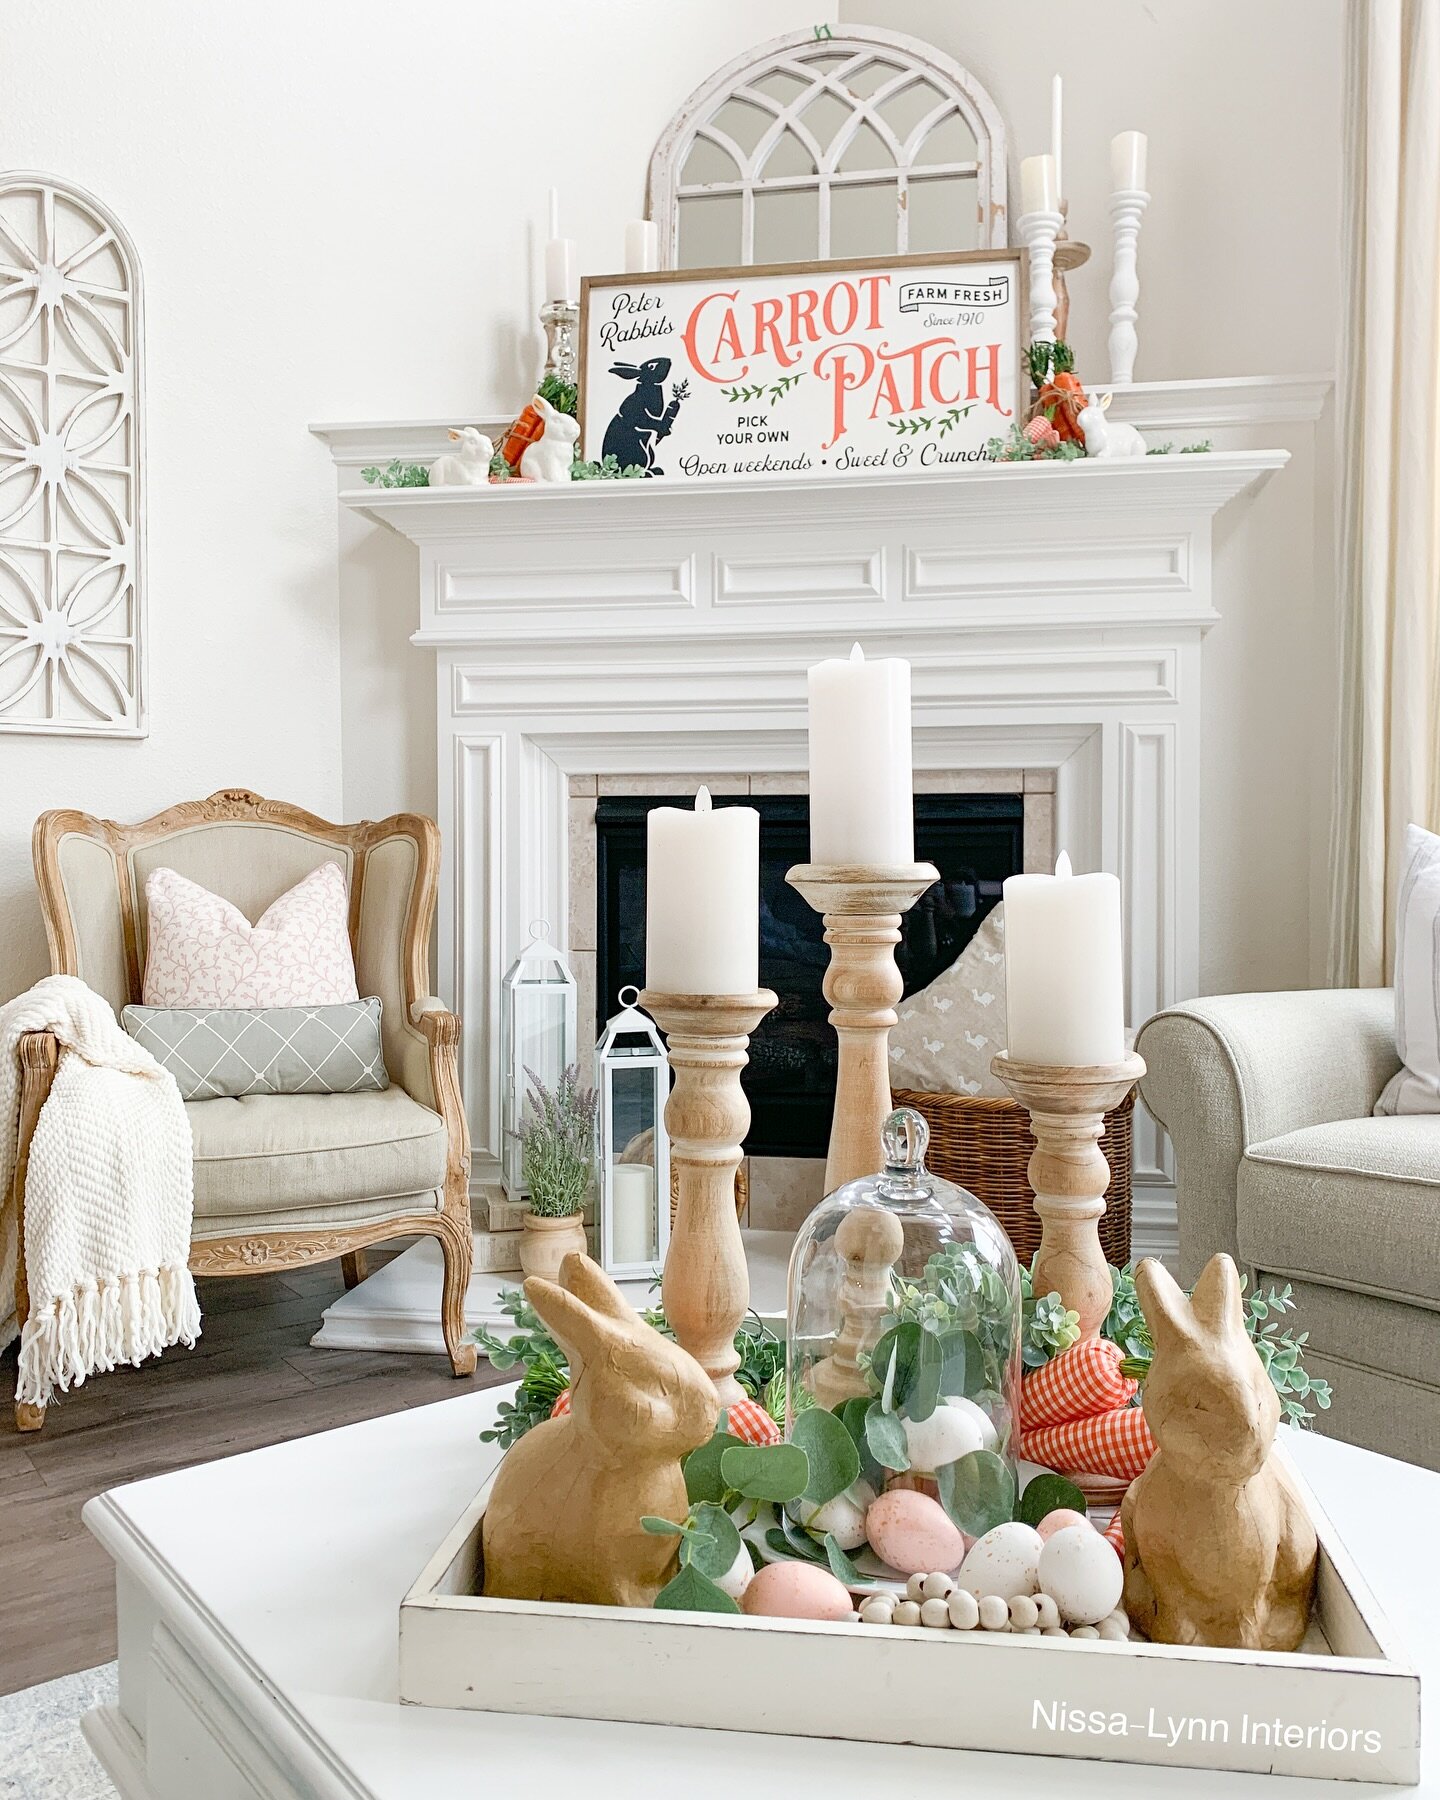 Can you believe Easter is in 9 days? My eight year old daughter asked me when we were going to put Easter decor up? So I had to deliver - and fast! (I&rsquo;m a little behind this year!🫣) The living room is now ready!🐰

Decorating Tip: Place any de